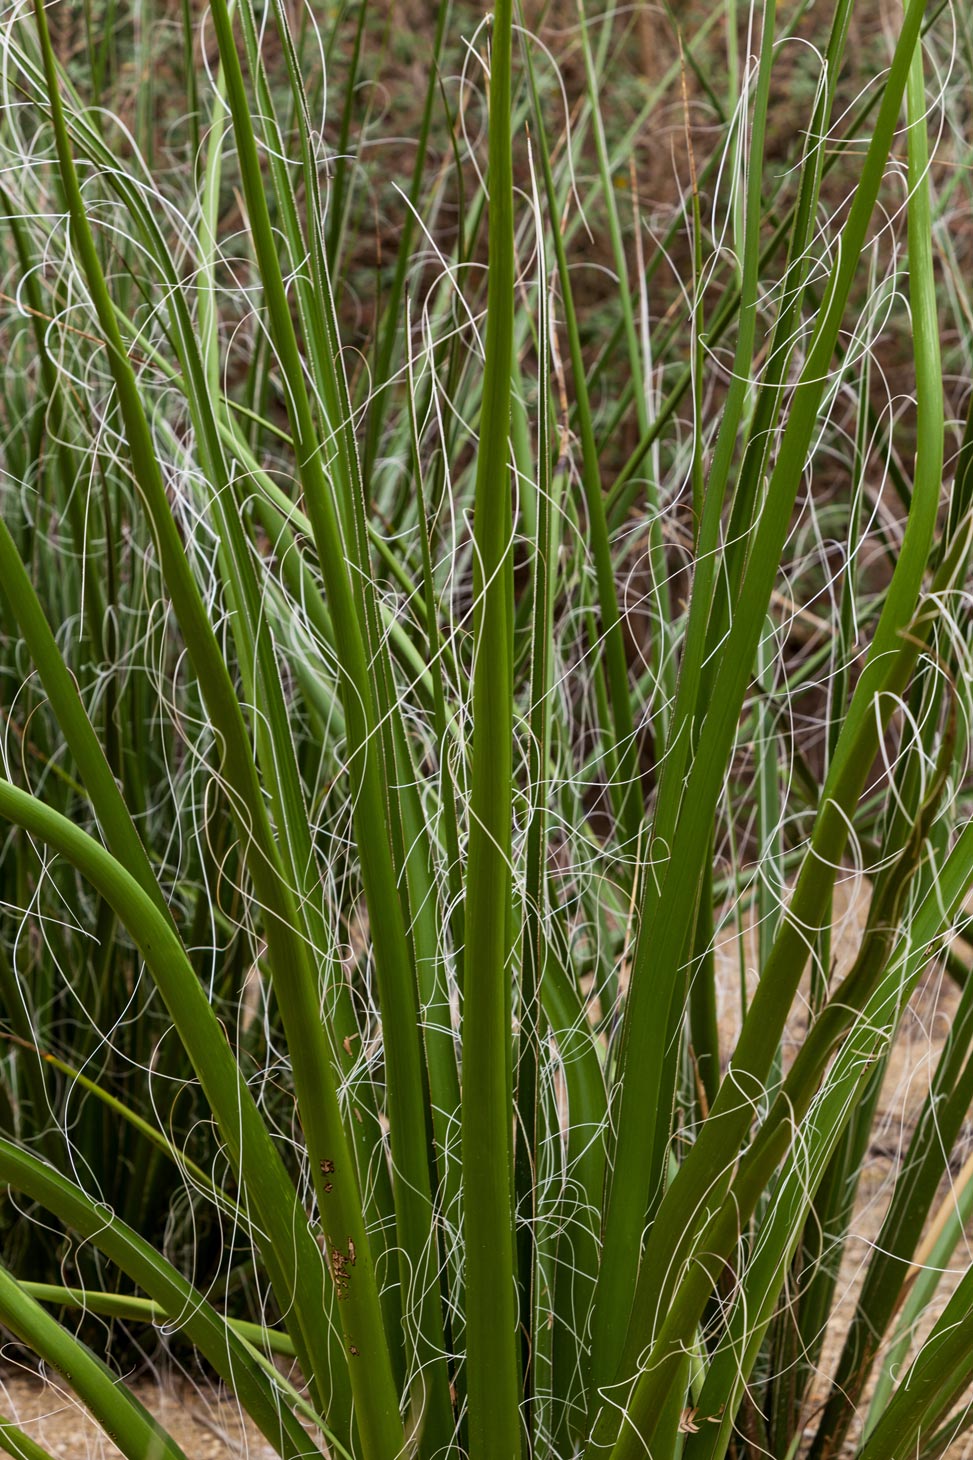 A close-up of the leaves of the Giant Hesperaloe.